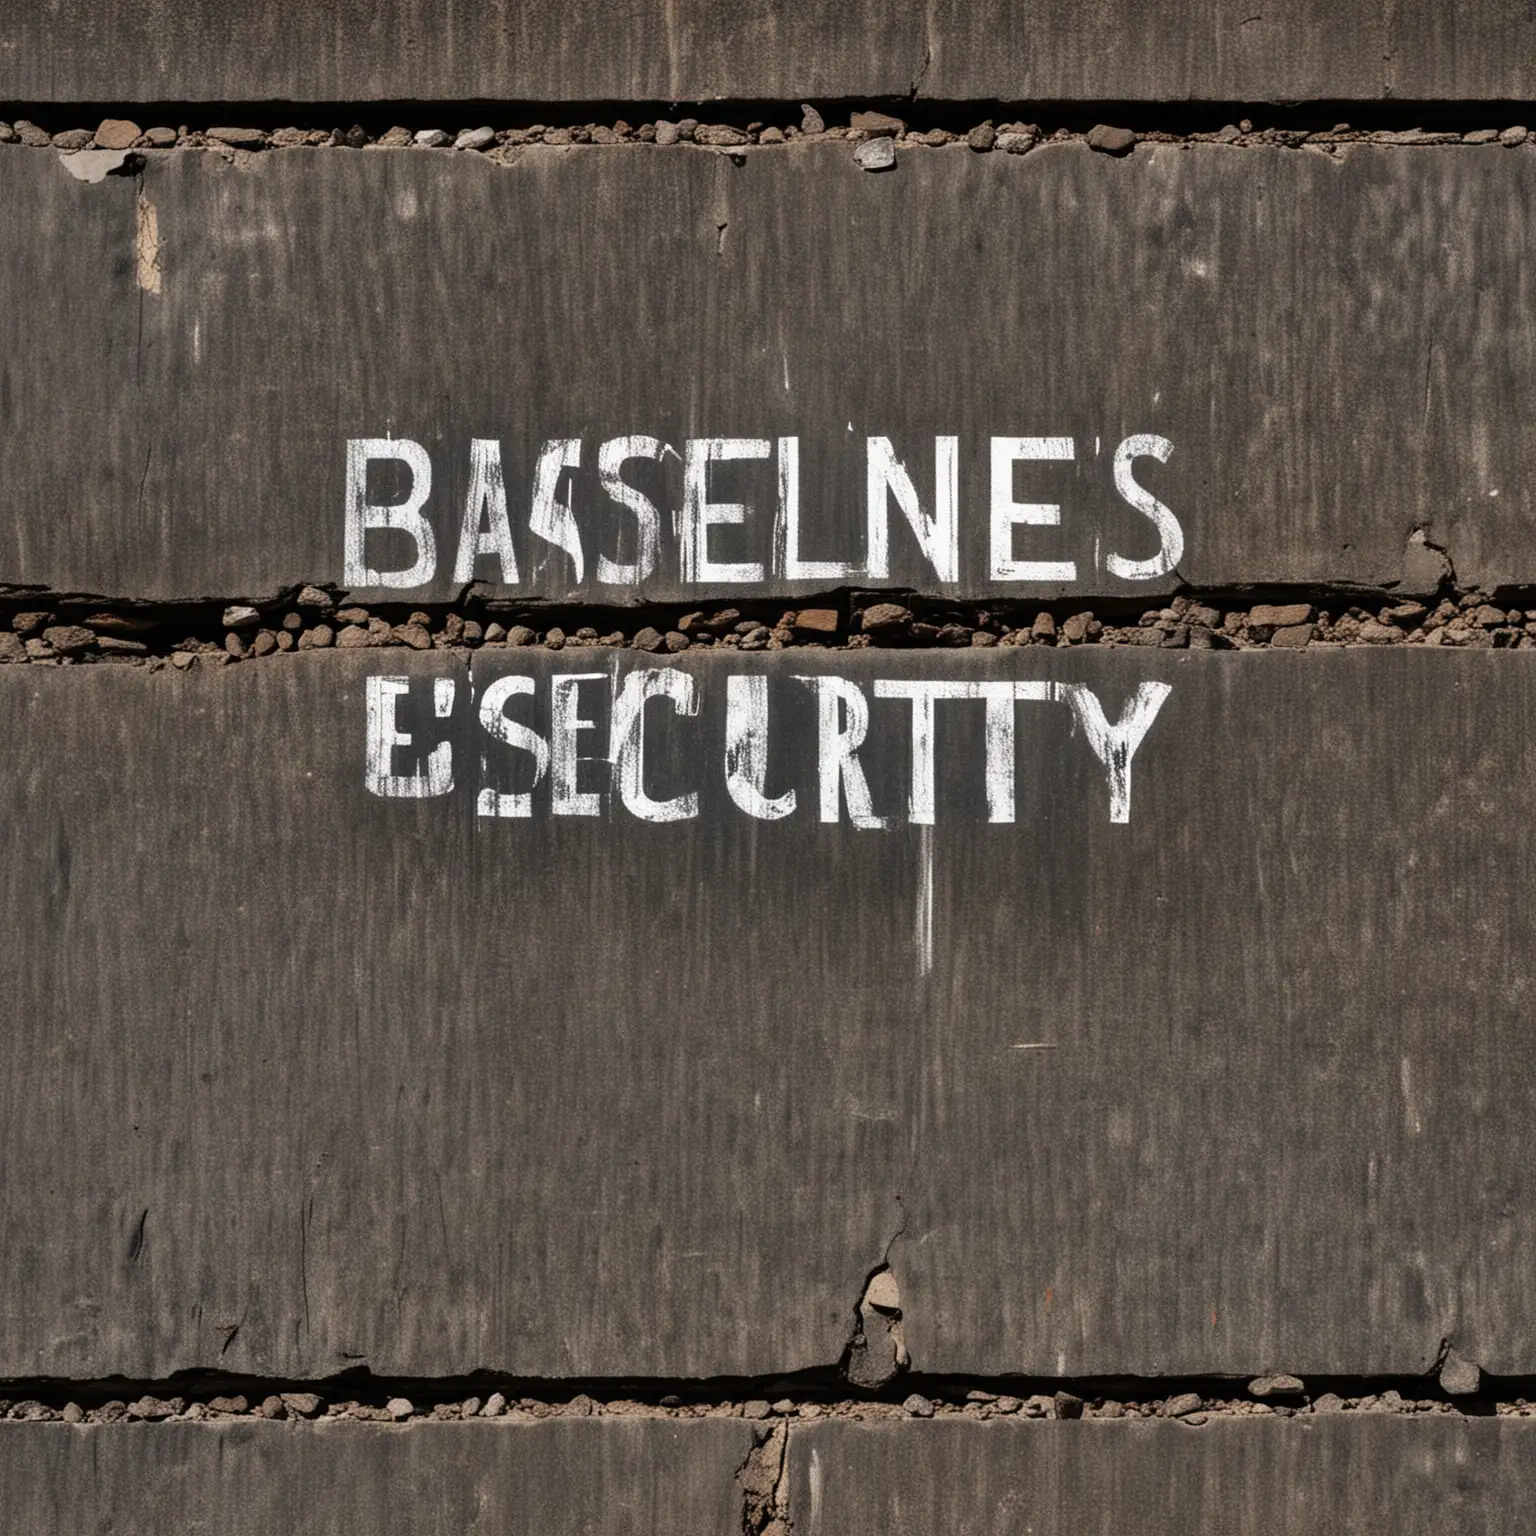 Baselines for security